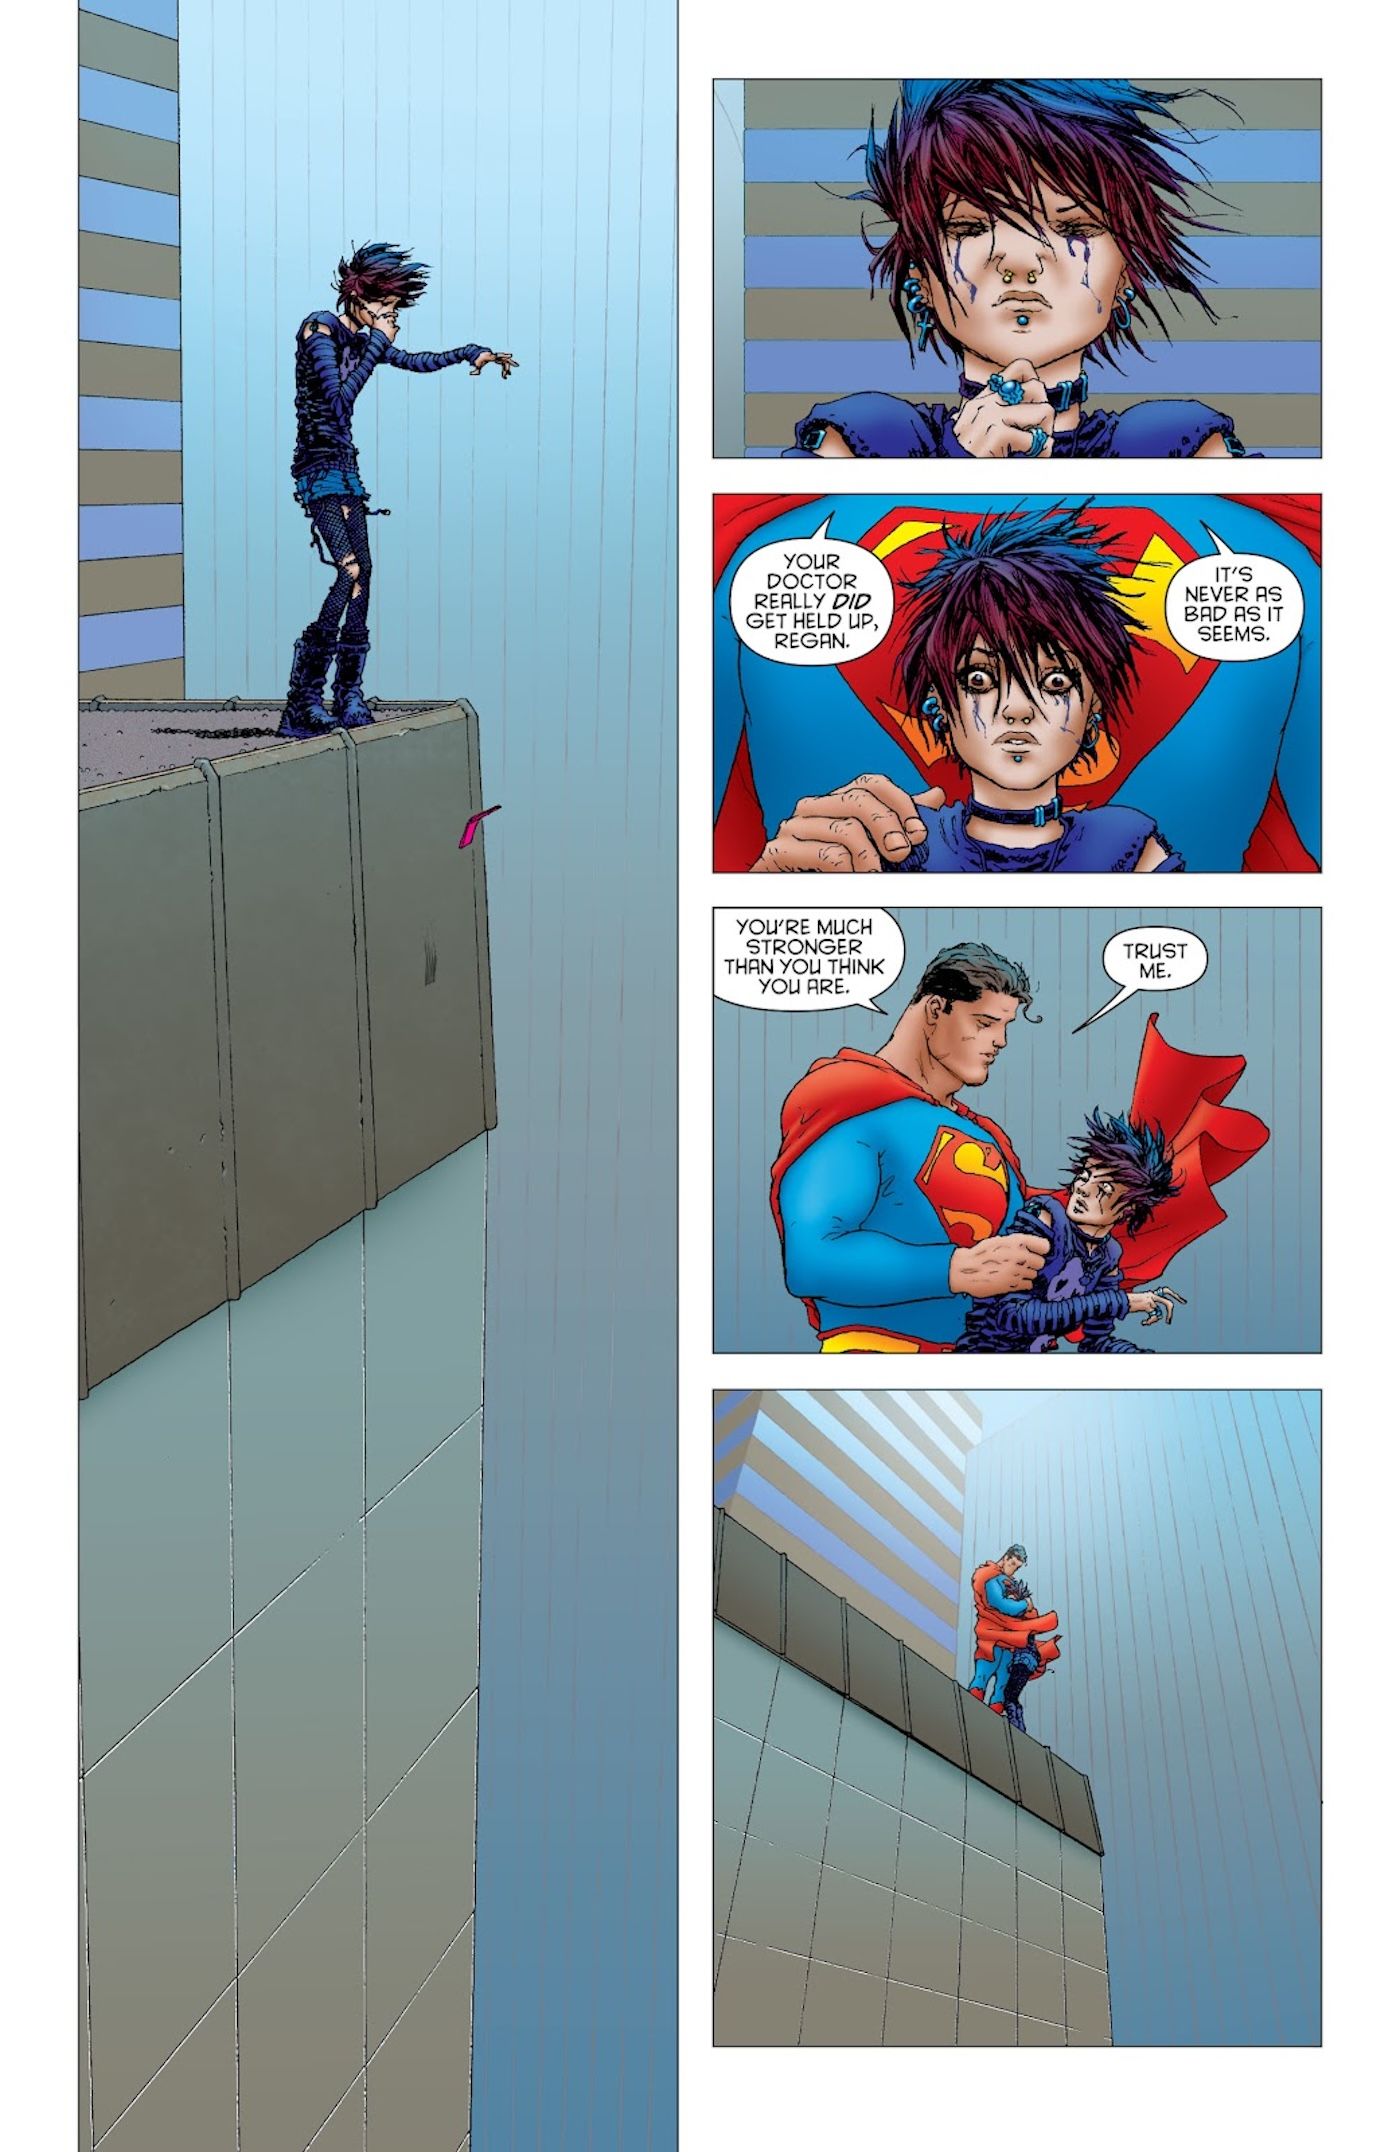 Comic book panels: a girl looks ready to jump from a building, but Superman puts a hand on her shoulder and then hugs her.